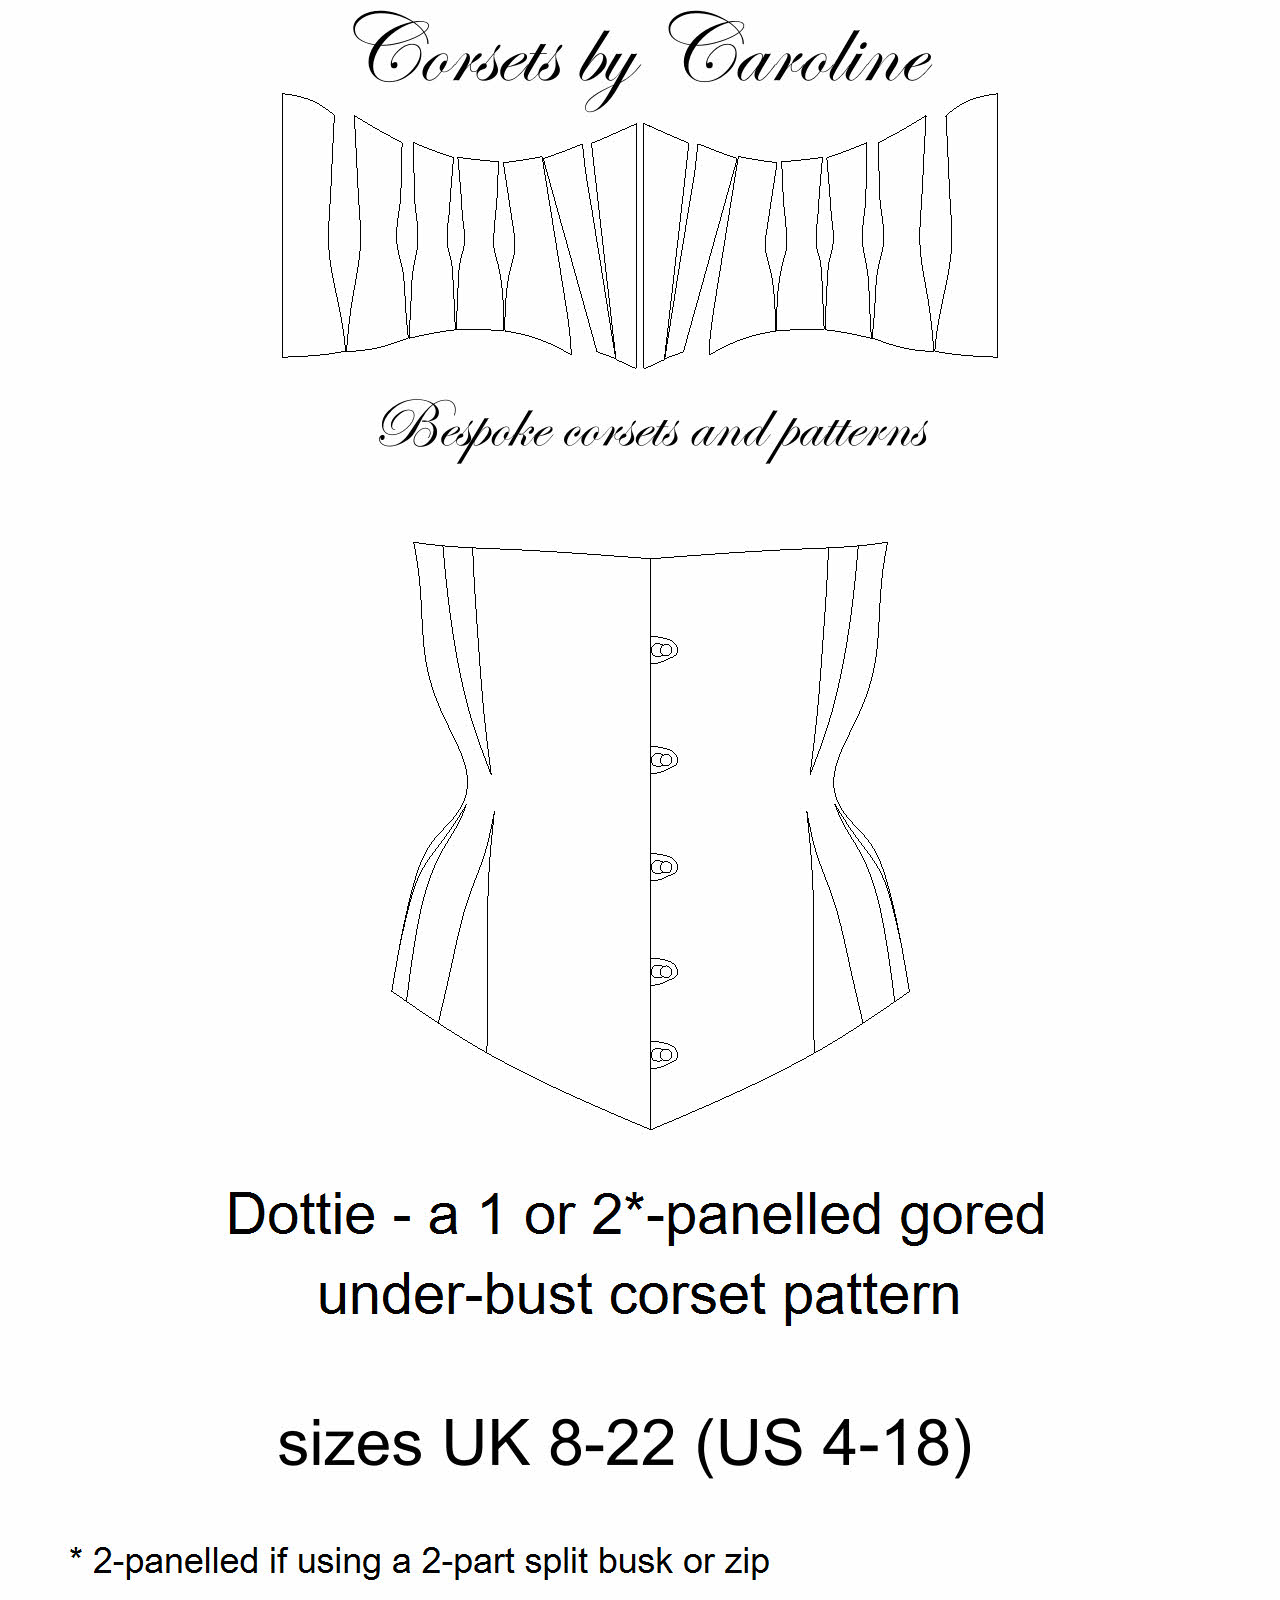 What size should I get? Underbust is 28” hips are 30” and my waist